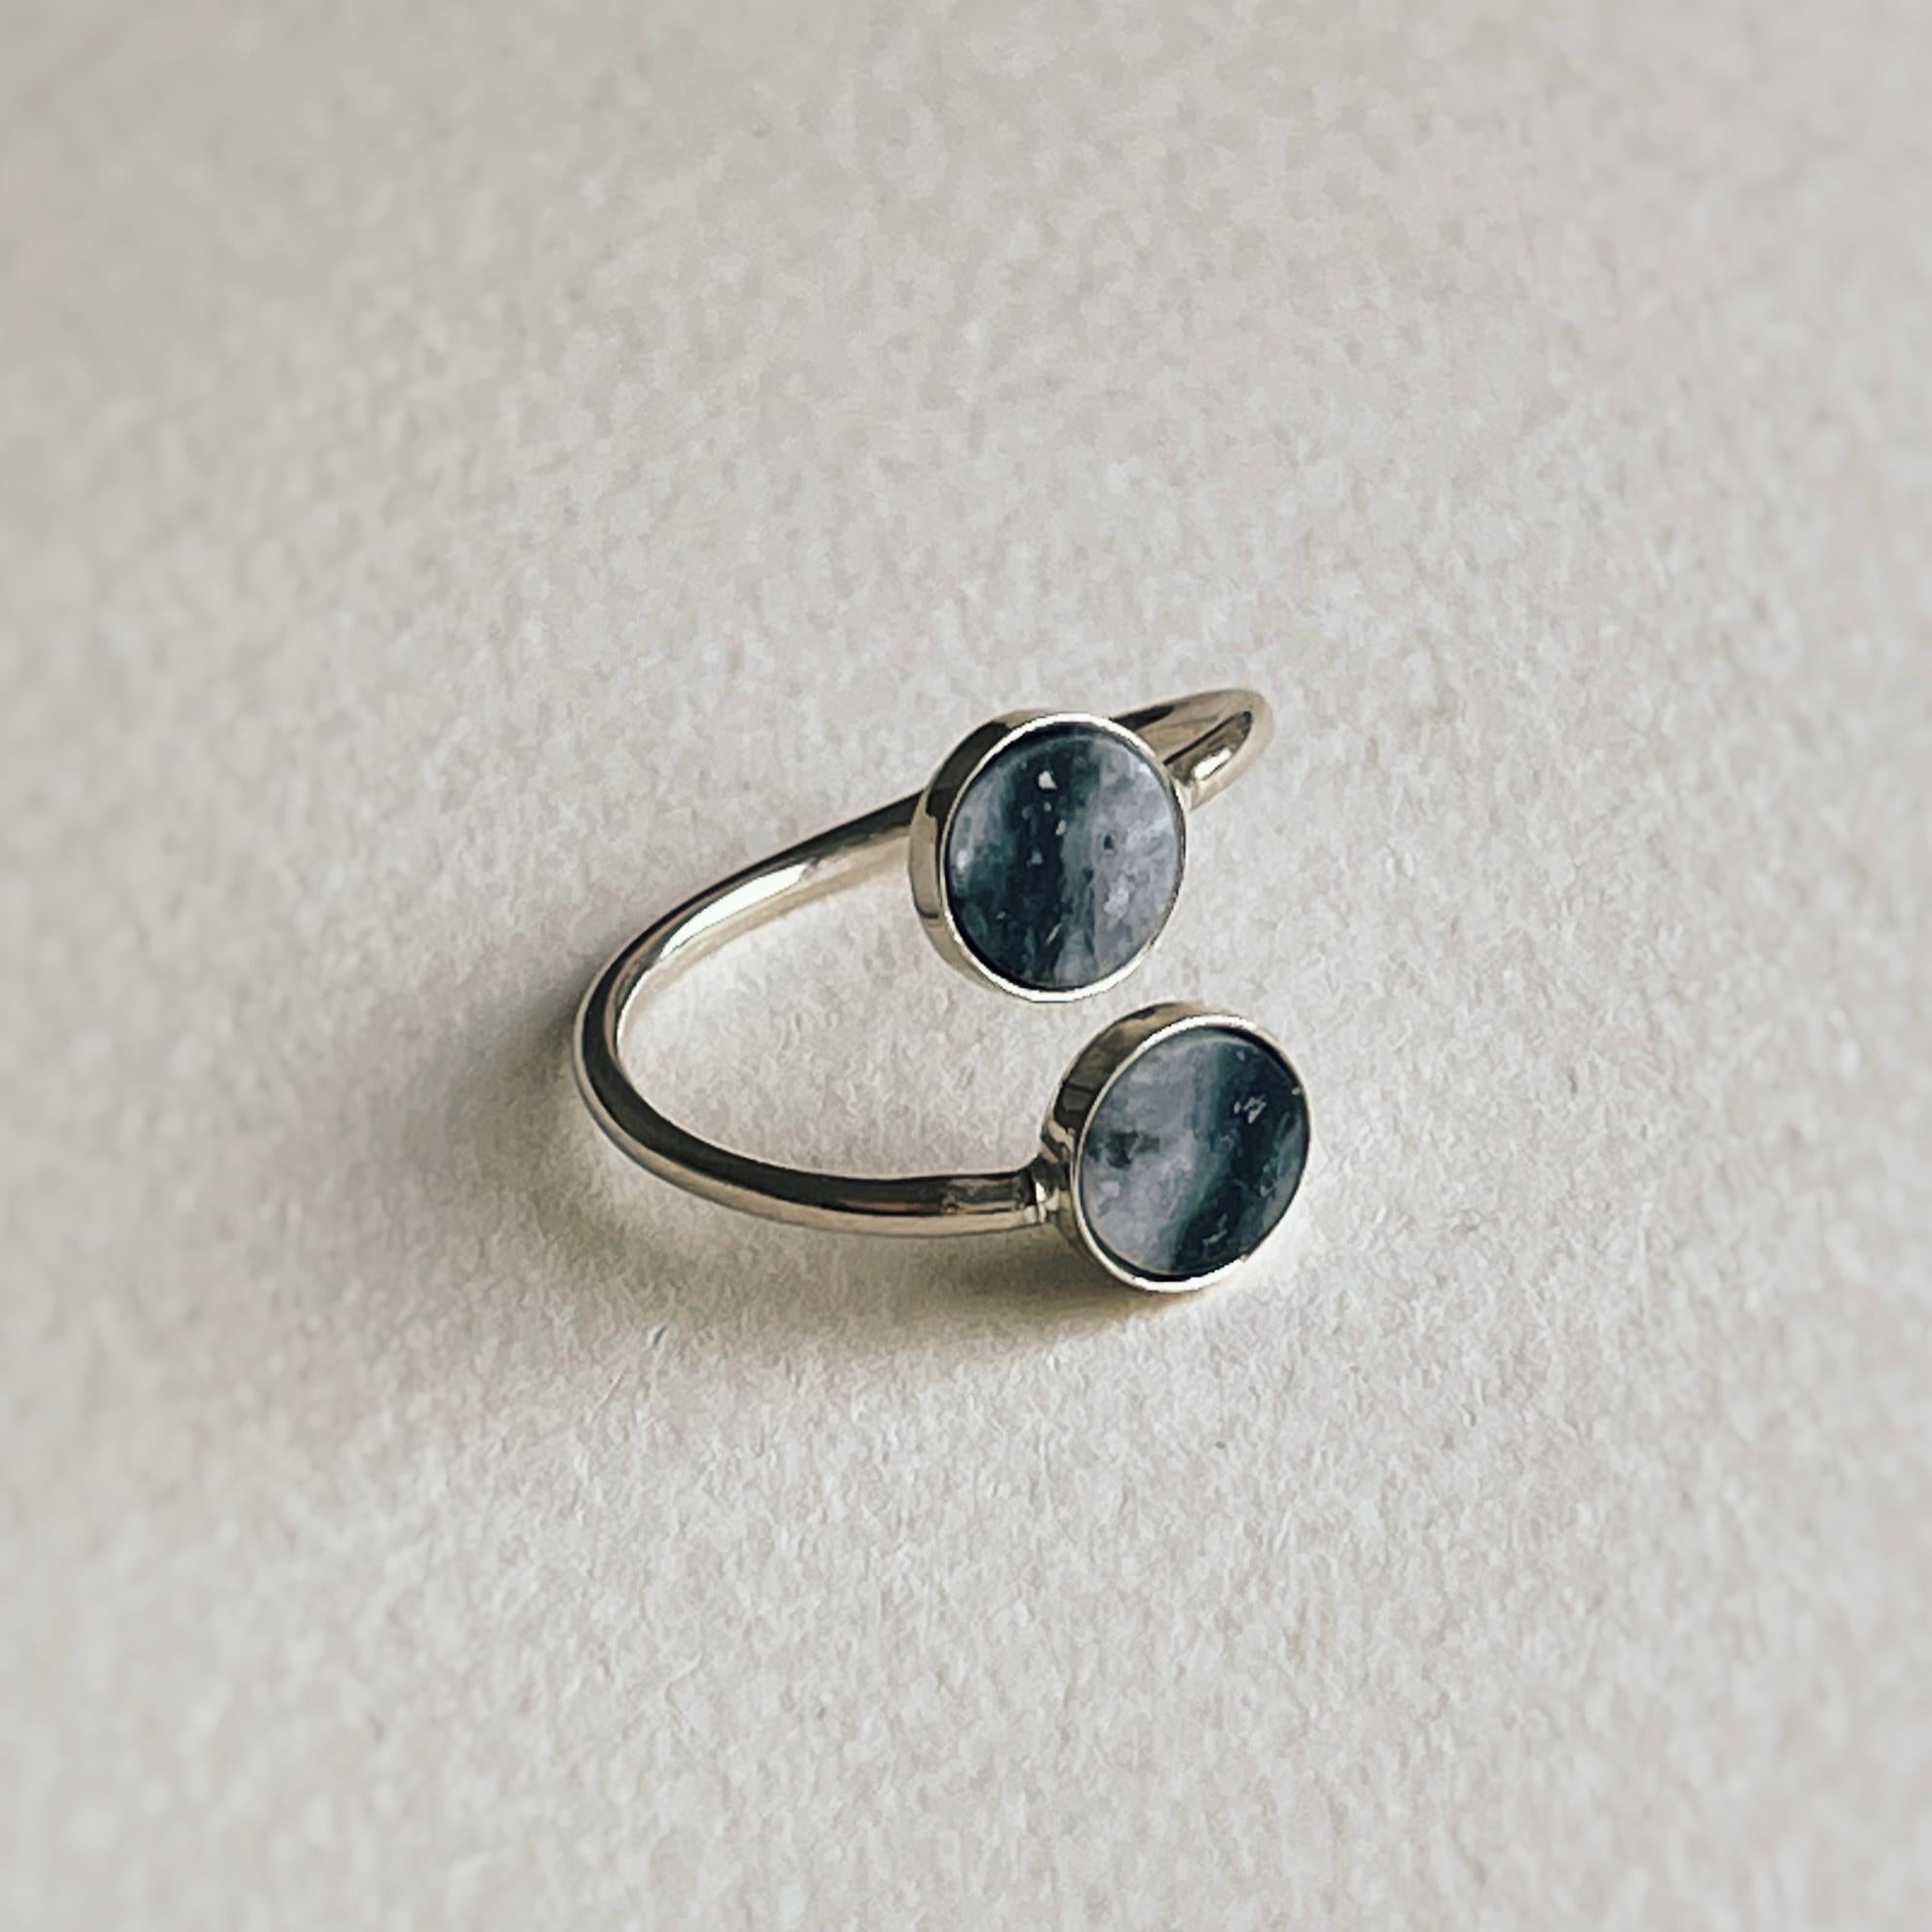 Cabochon Open sterling silver ring with grey natural stones size 5-5.5 For Sale